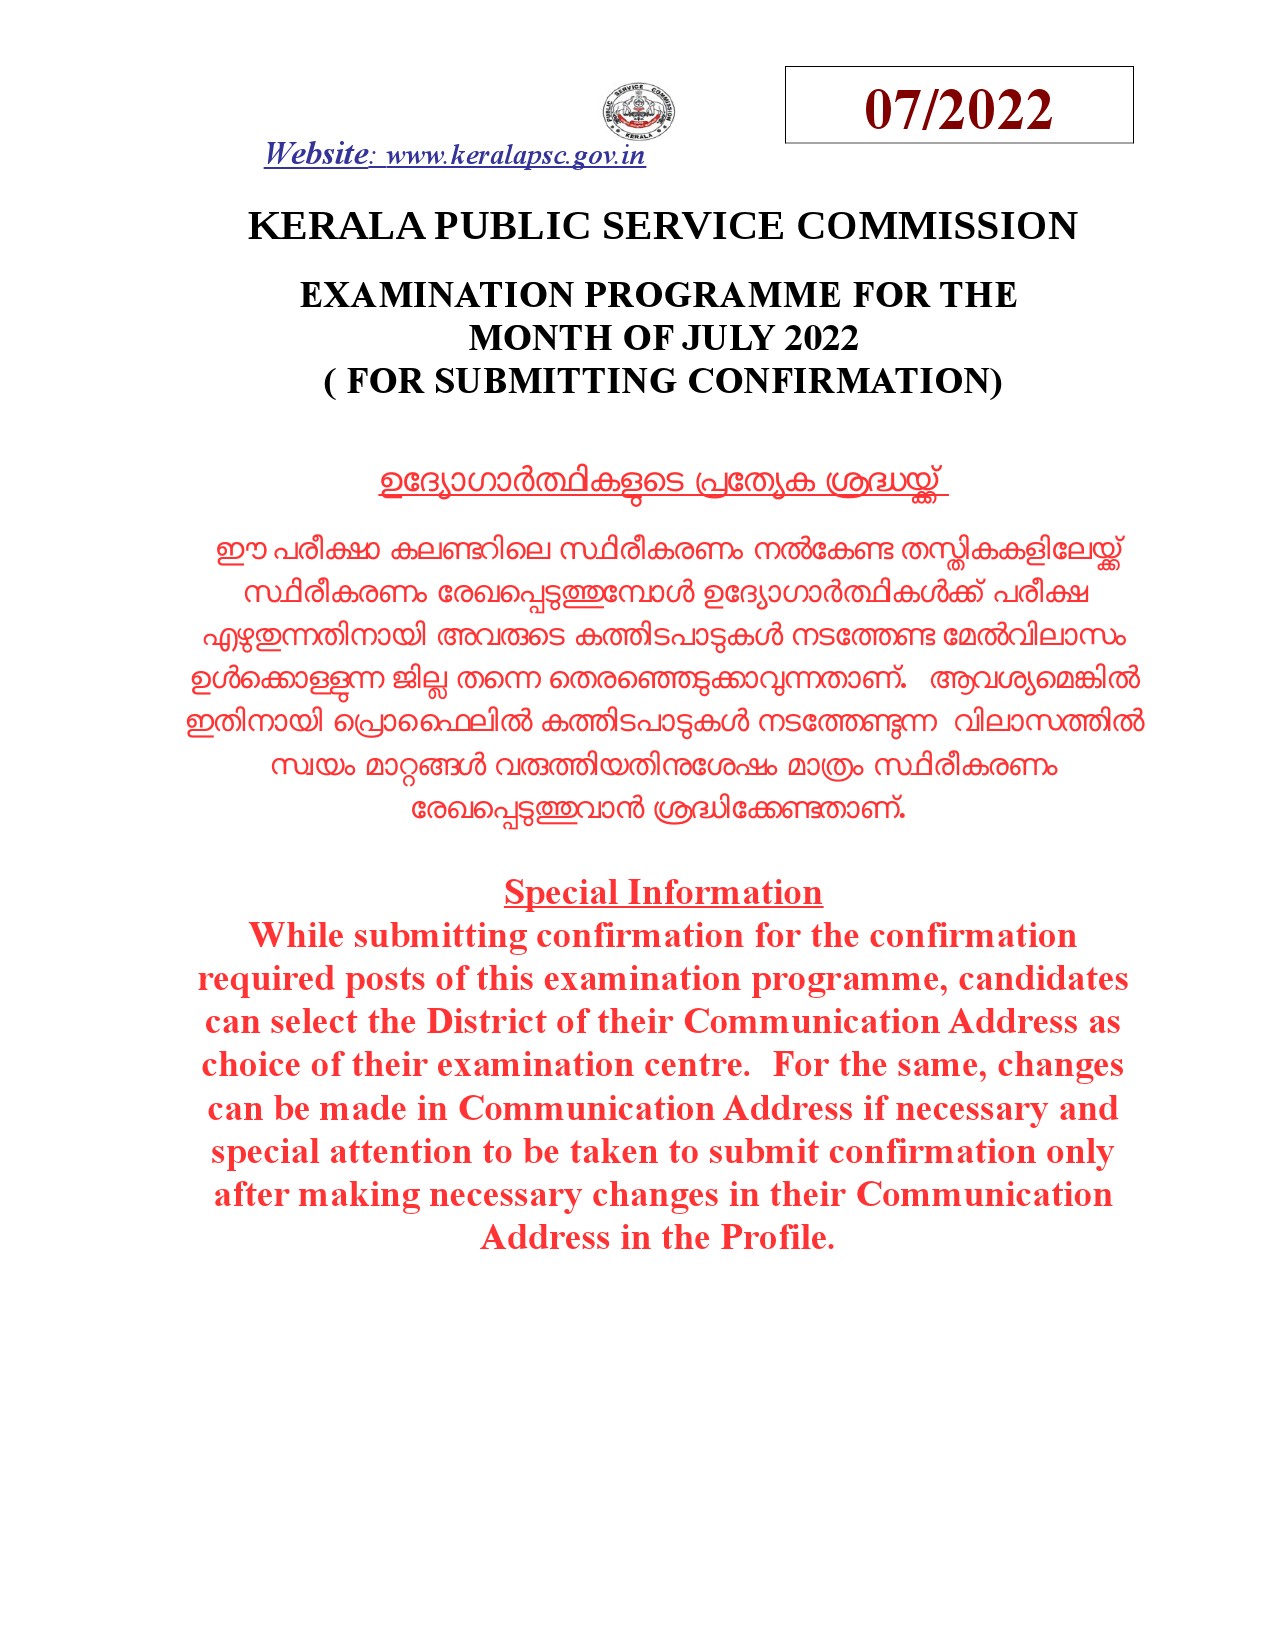 KPSC EXAMINATION PROGRAMME FOR THE MONTH OF JULY 2022 - Notification Image 1